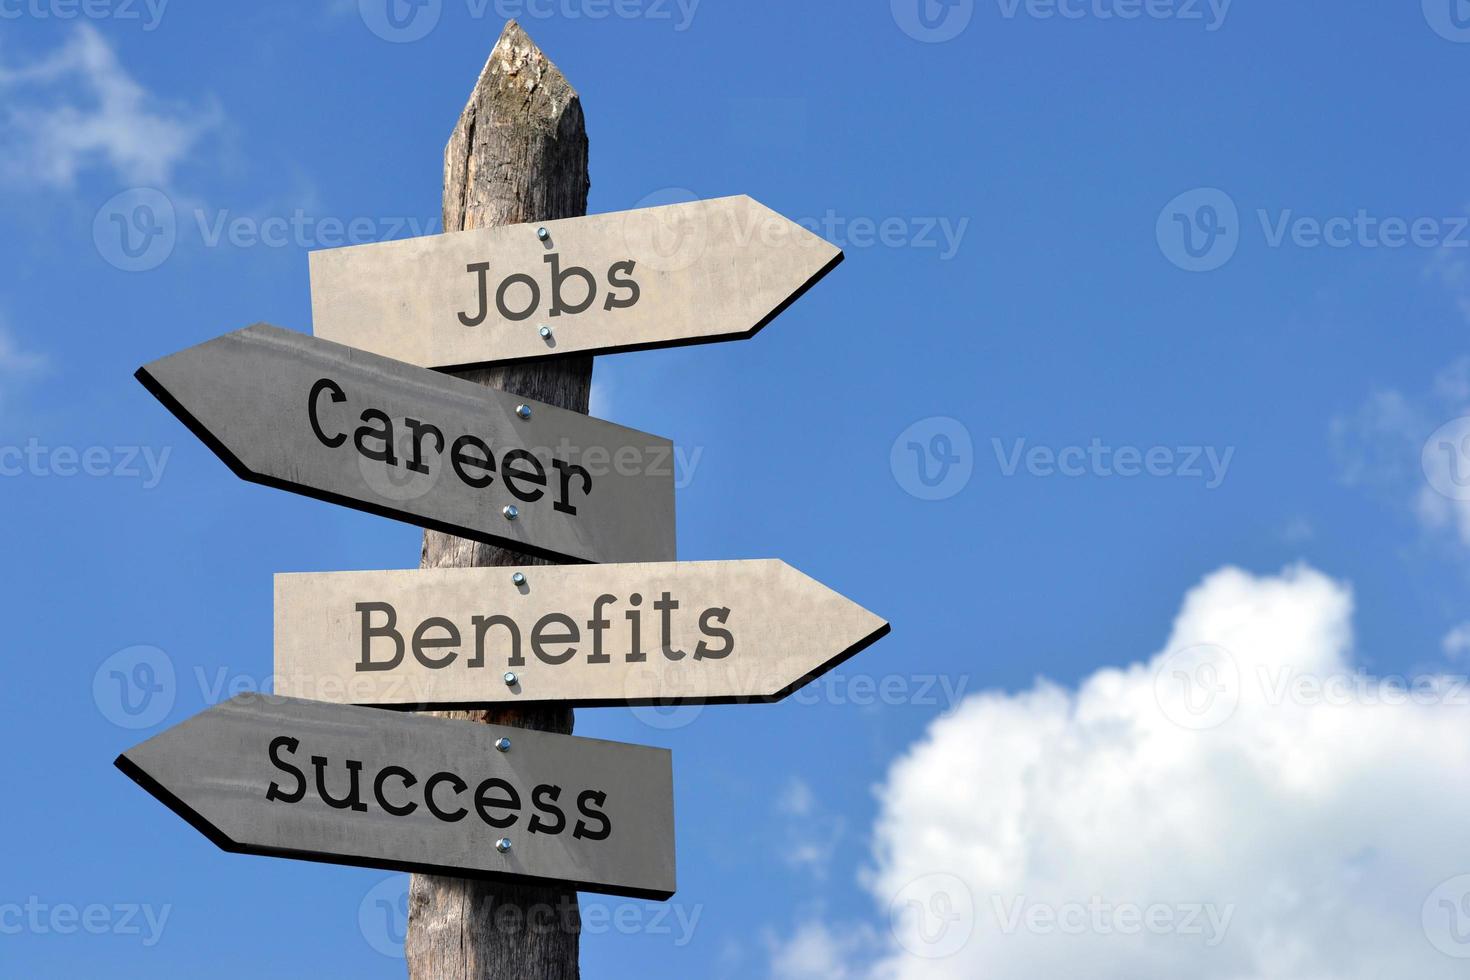 Jobs, Career, Benefits, Success - Wooden Signpost with Four Arrows, Sky with Clouds photo